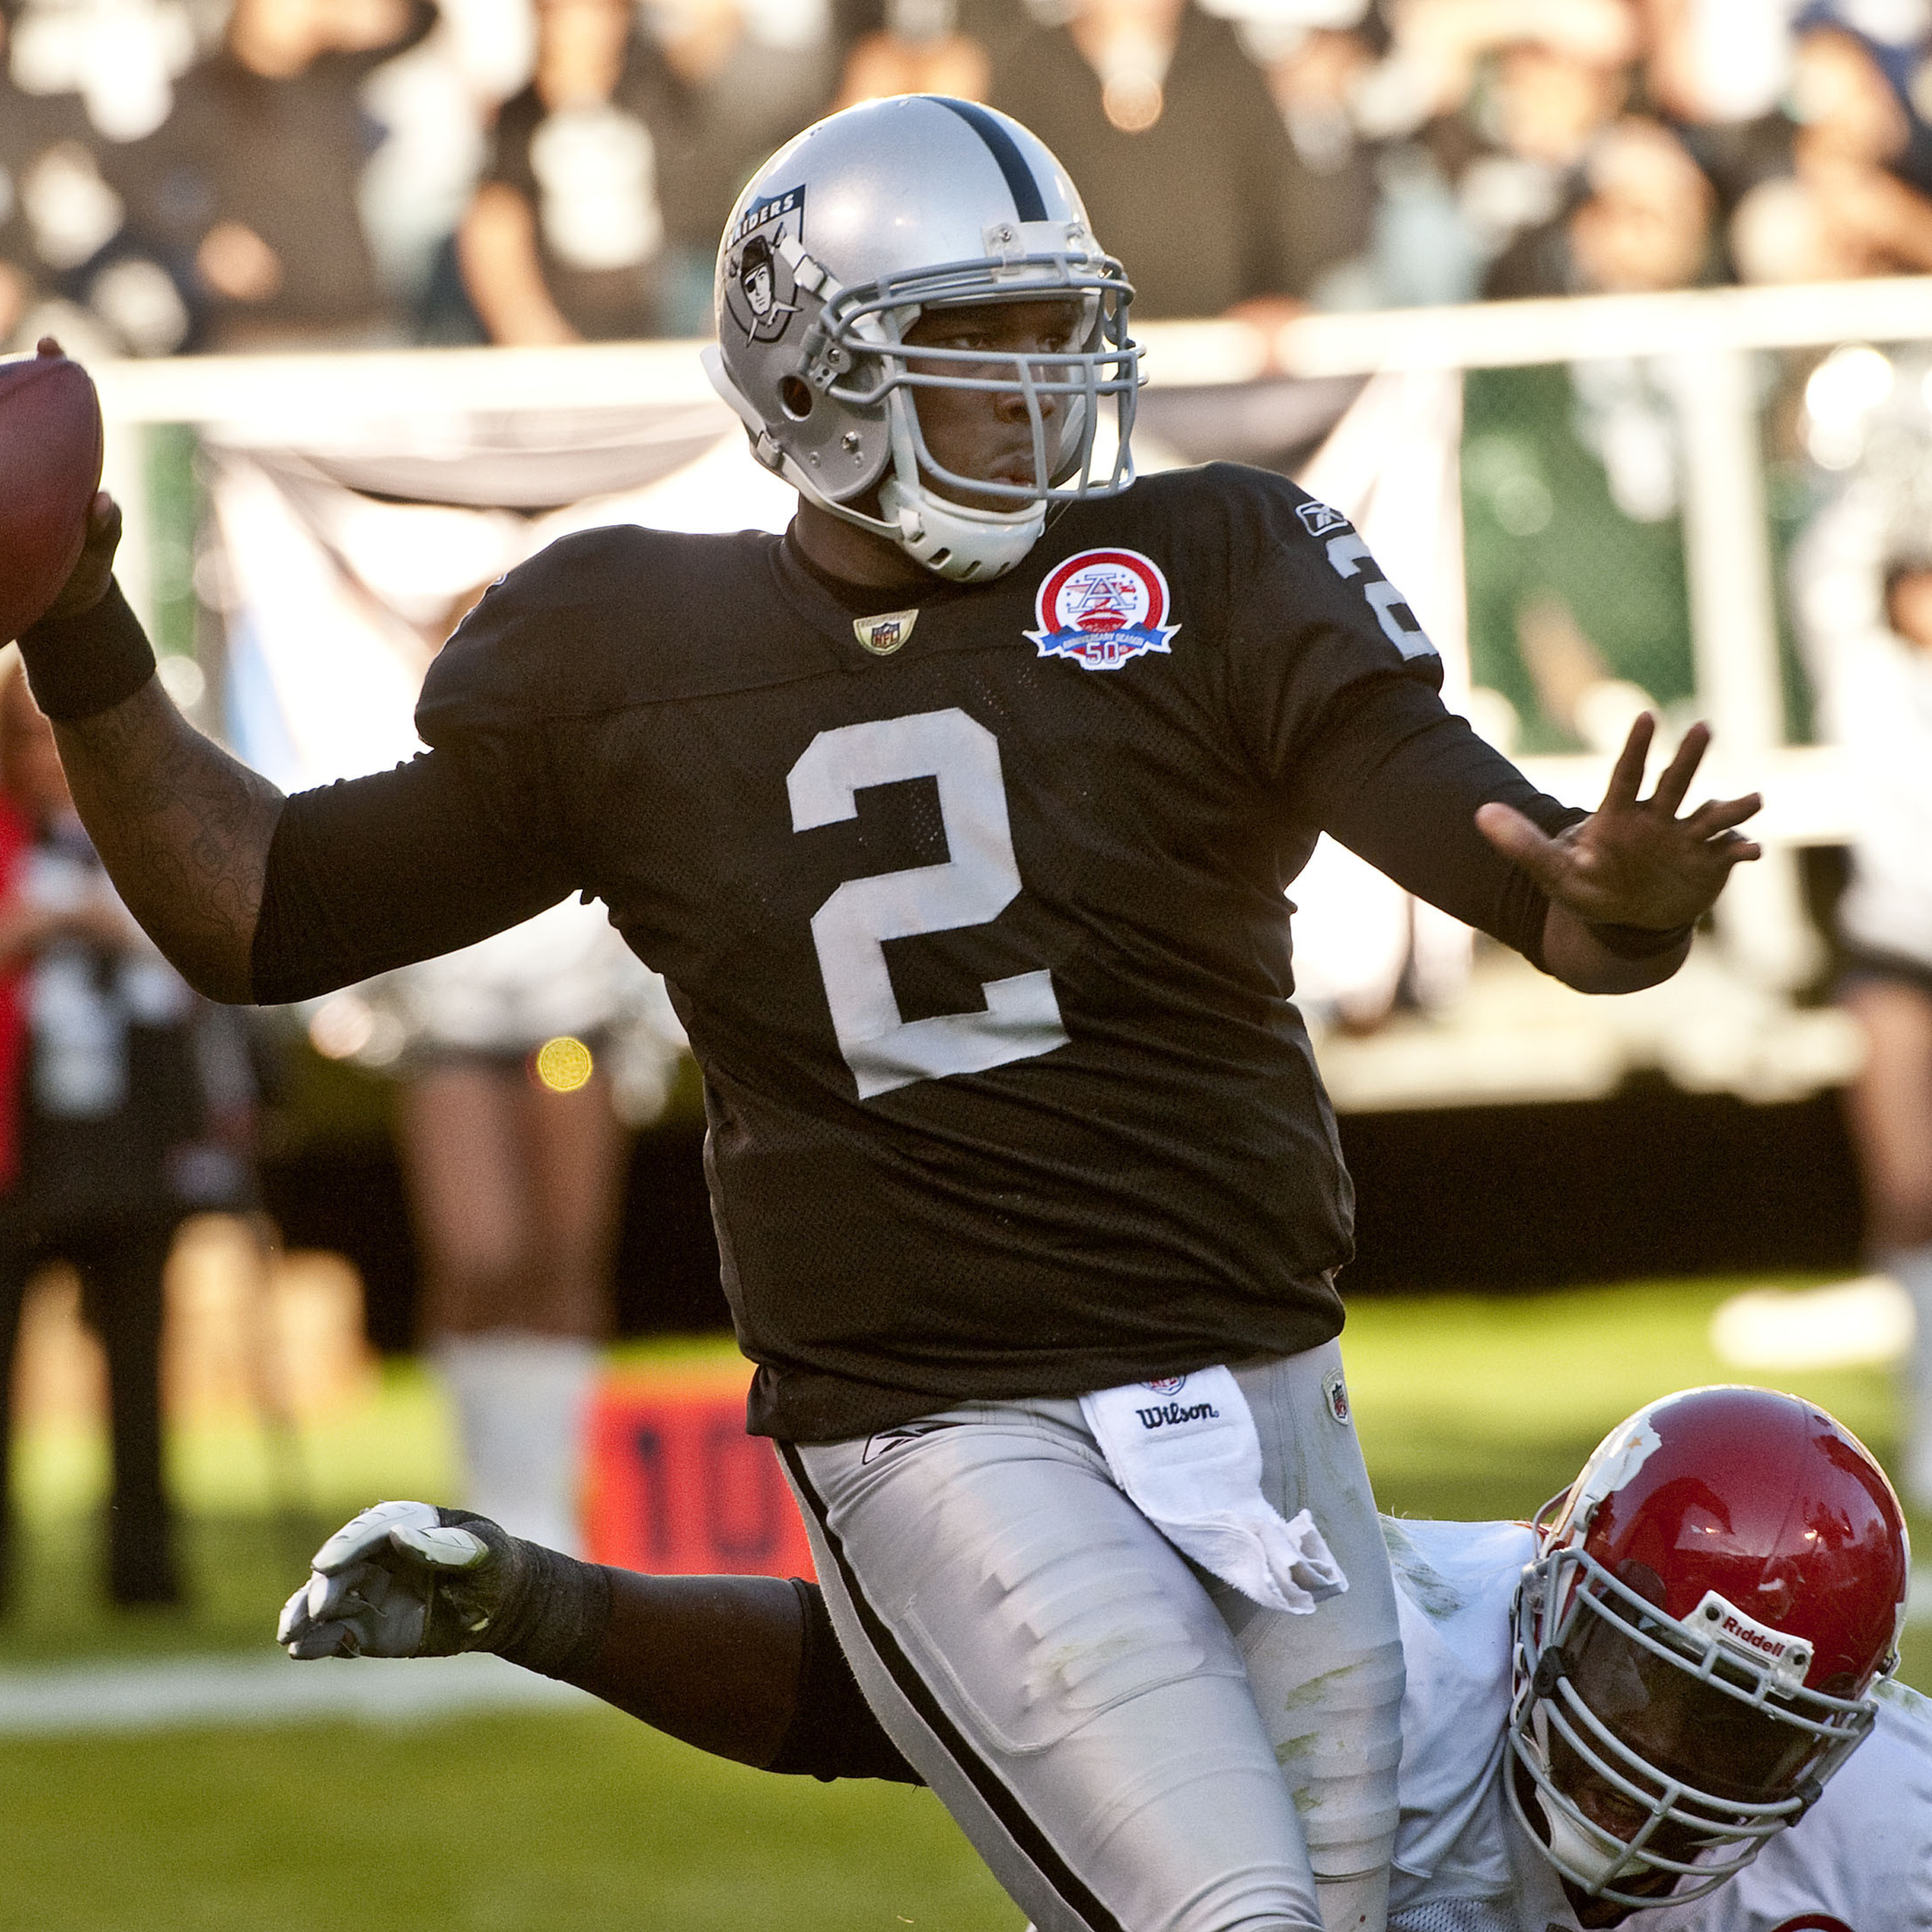 Former Raiders QB JaMarcus Russell Says He Used Codeine Syrup to Deal with Injuries